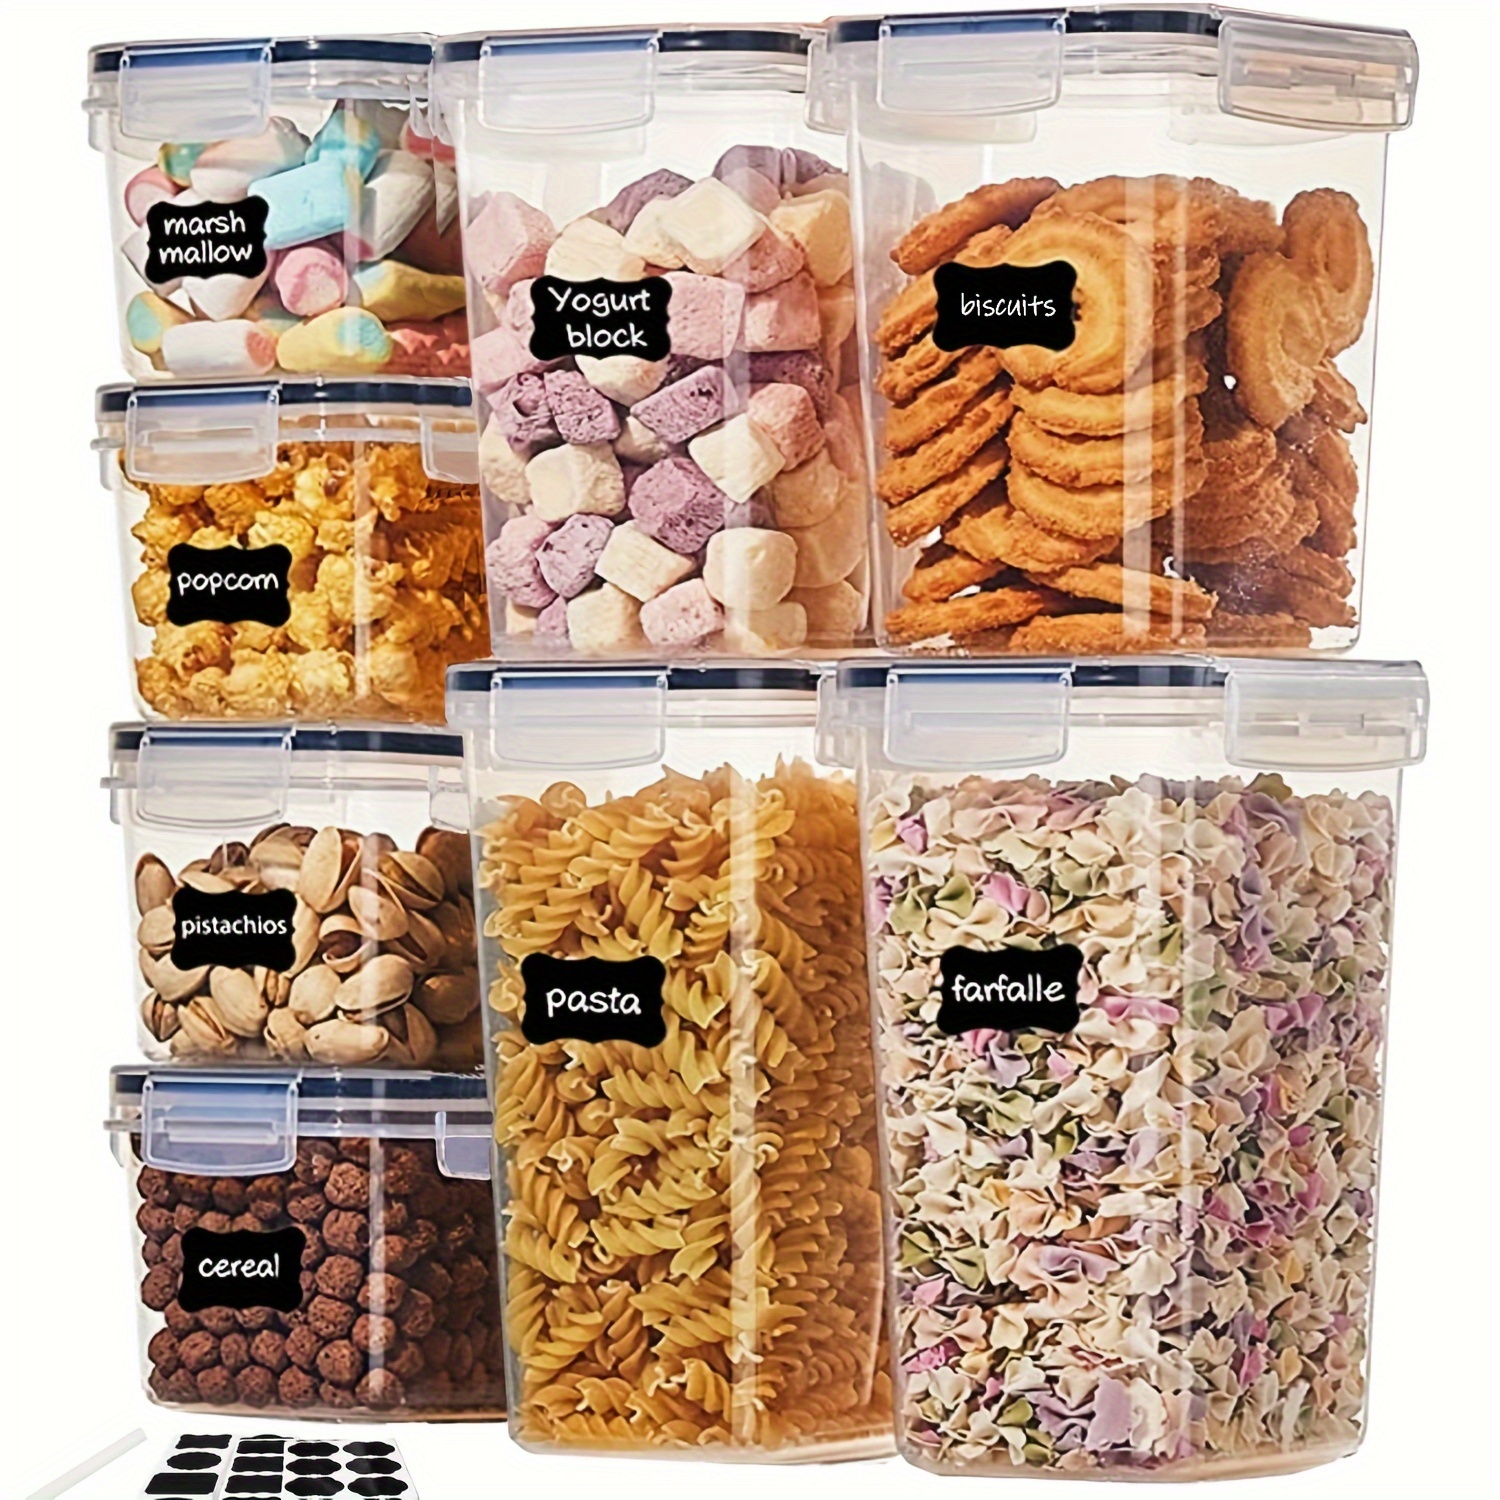 Airtight Food Storage Container W Lids for Flour, Sugar, Cereal, Dry Food 